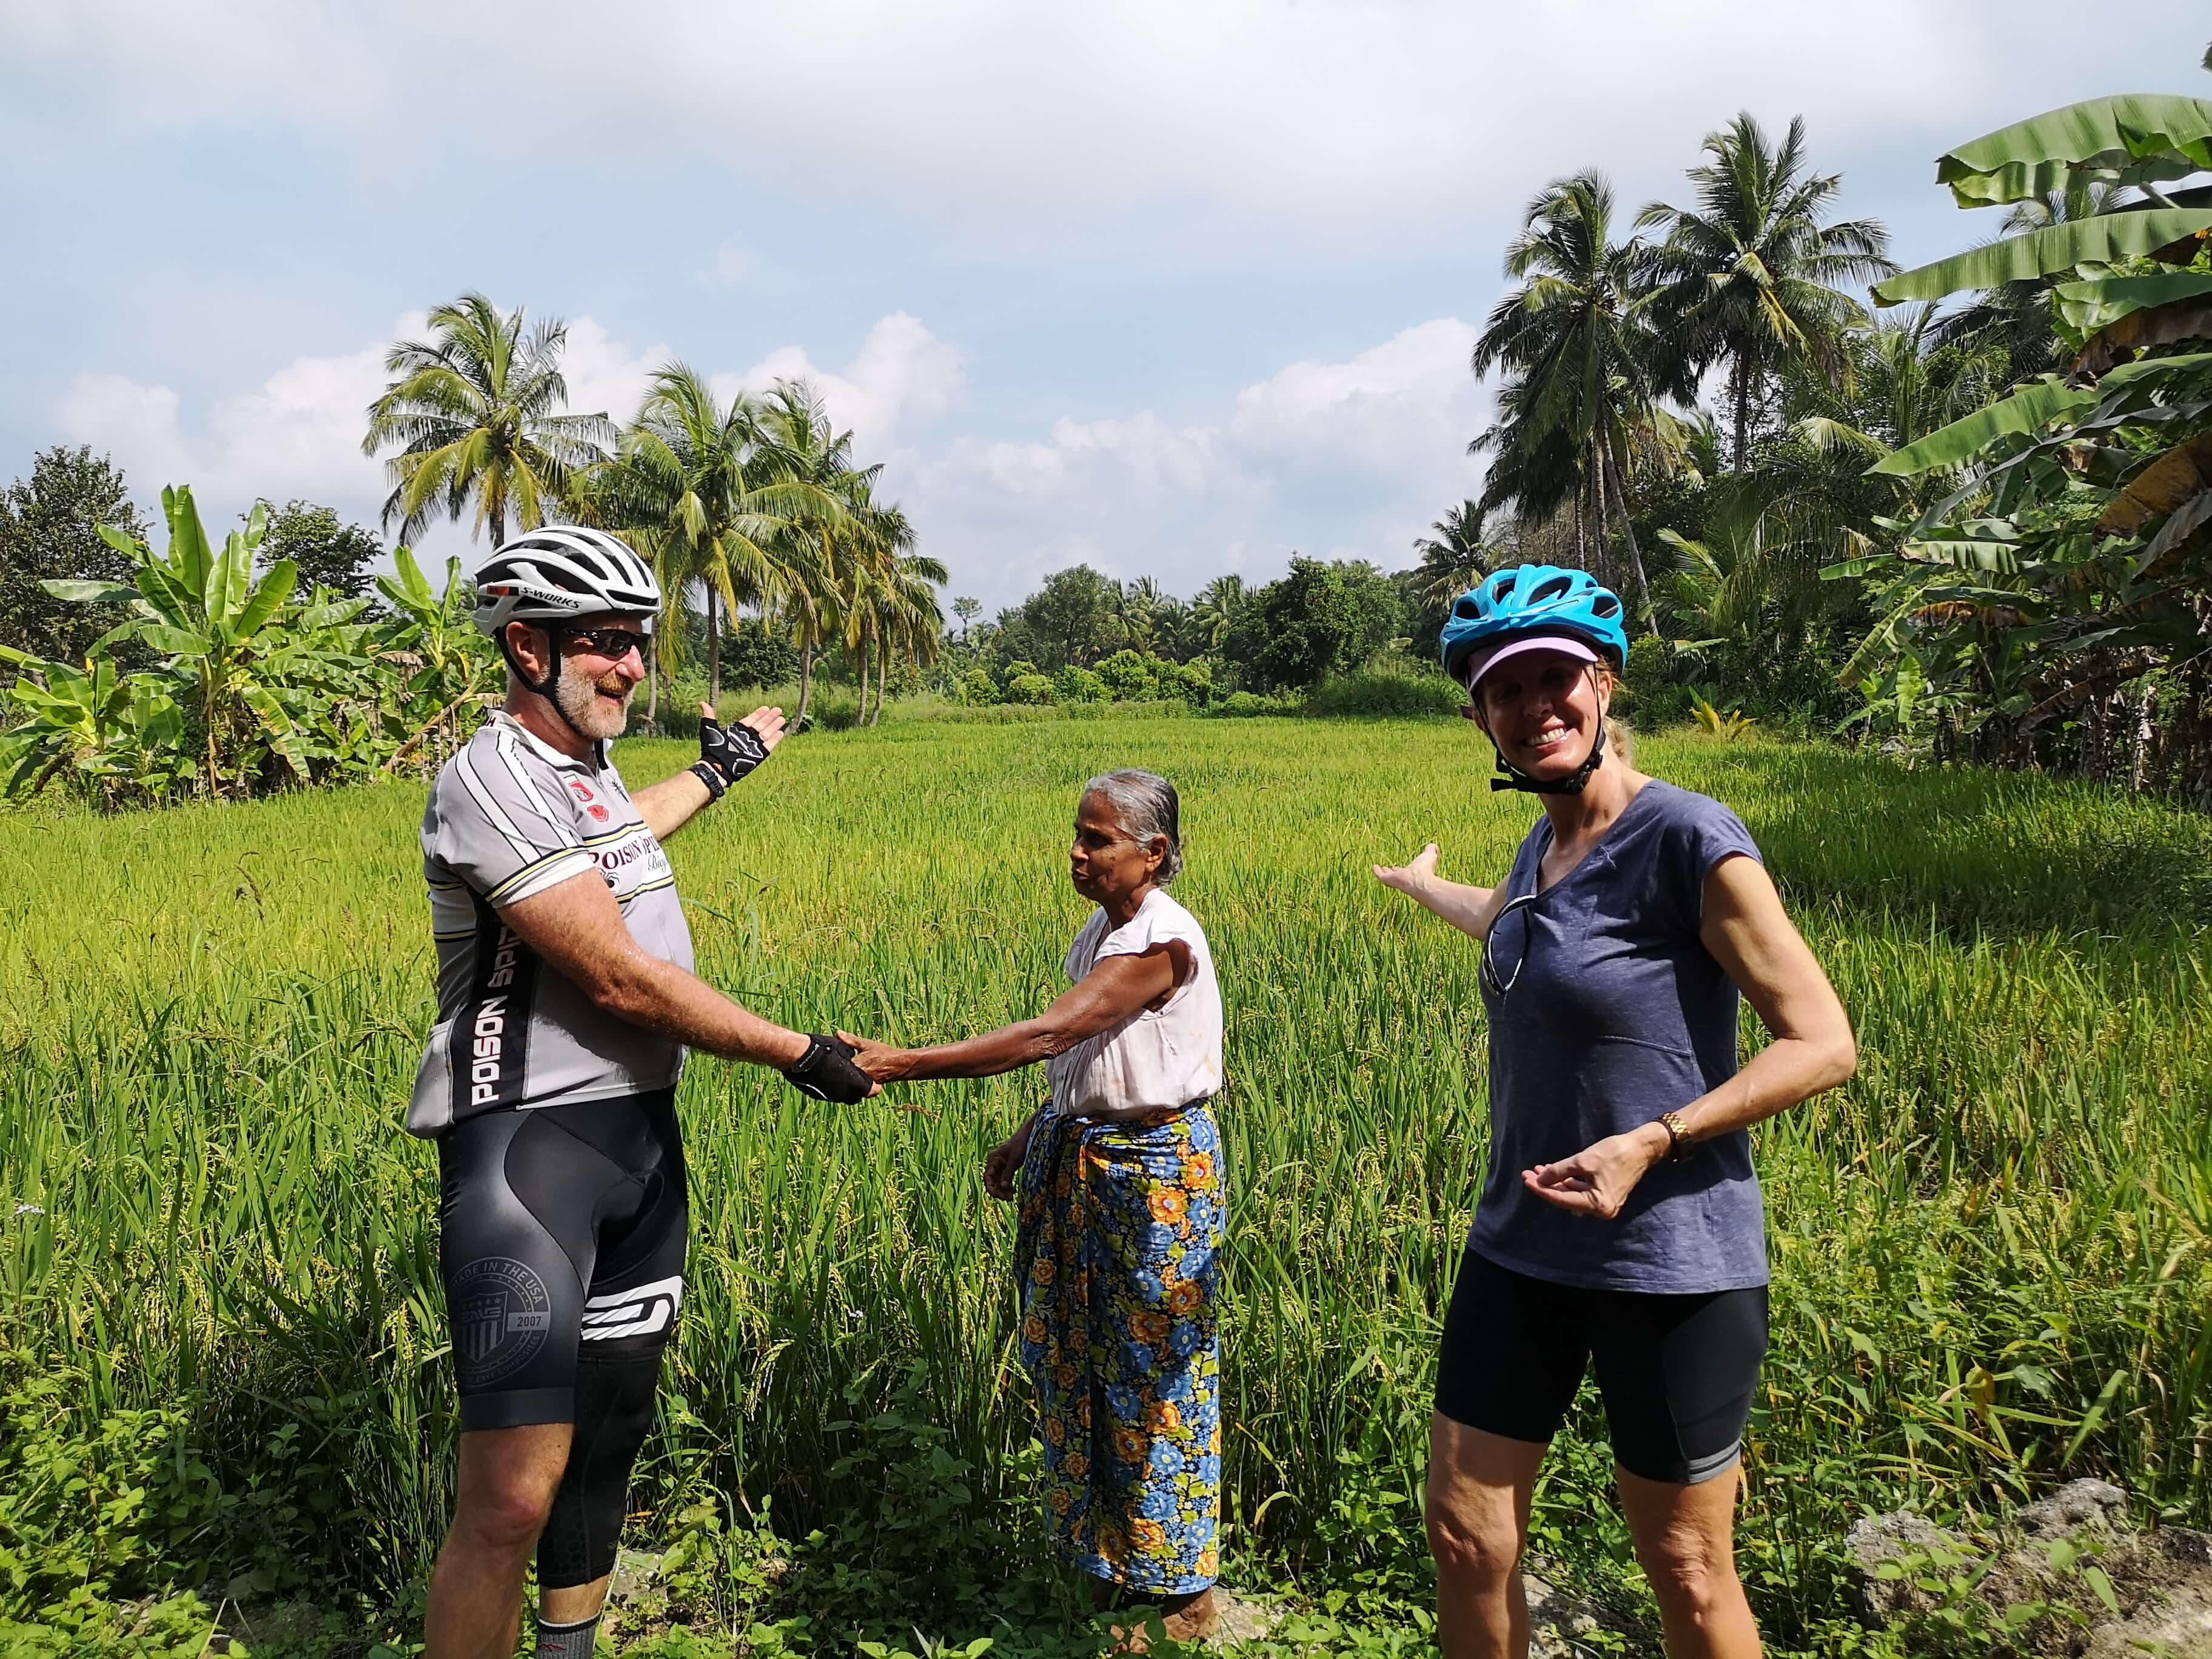 A photo of the cyclists watching a countryside paddy field with meeting local friendly people in Sri Lanka